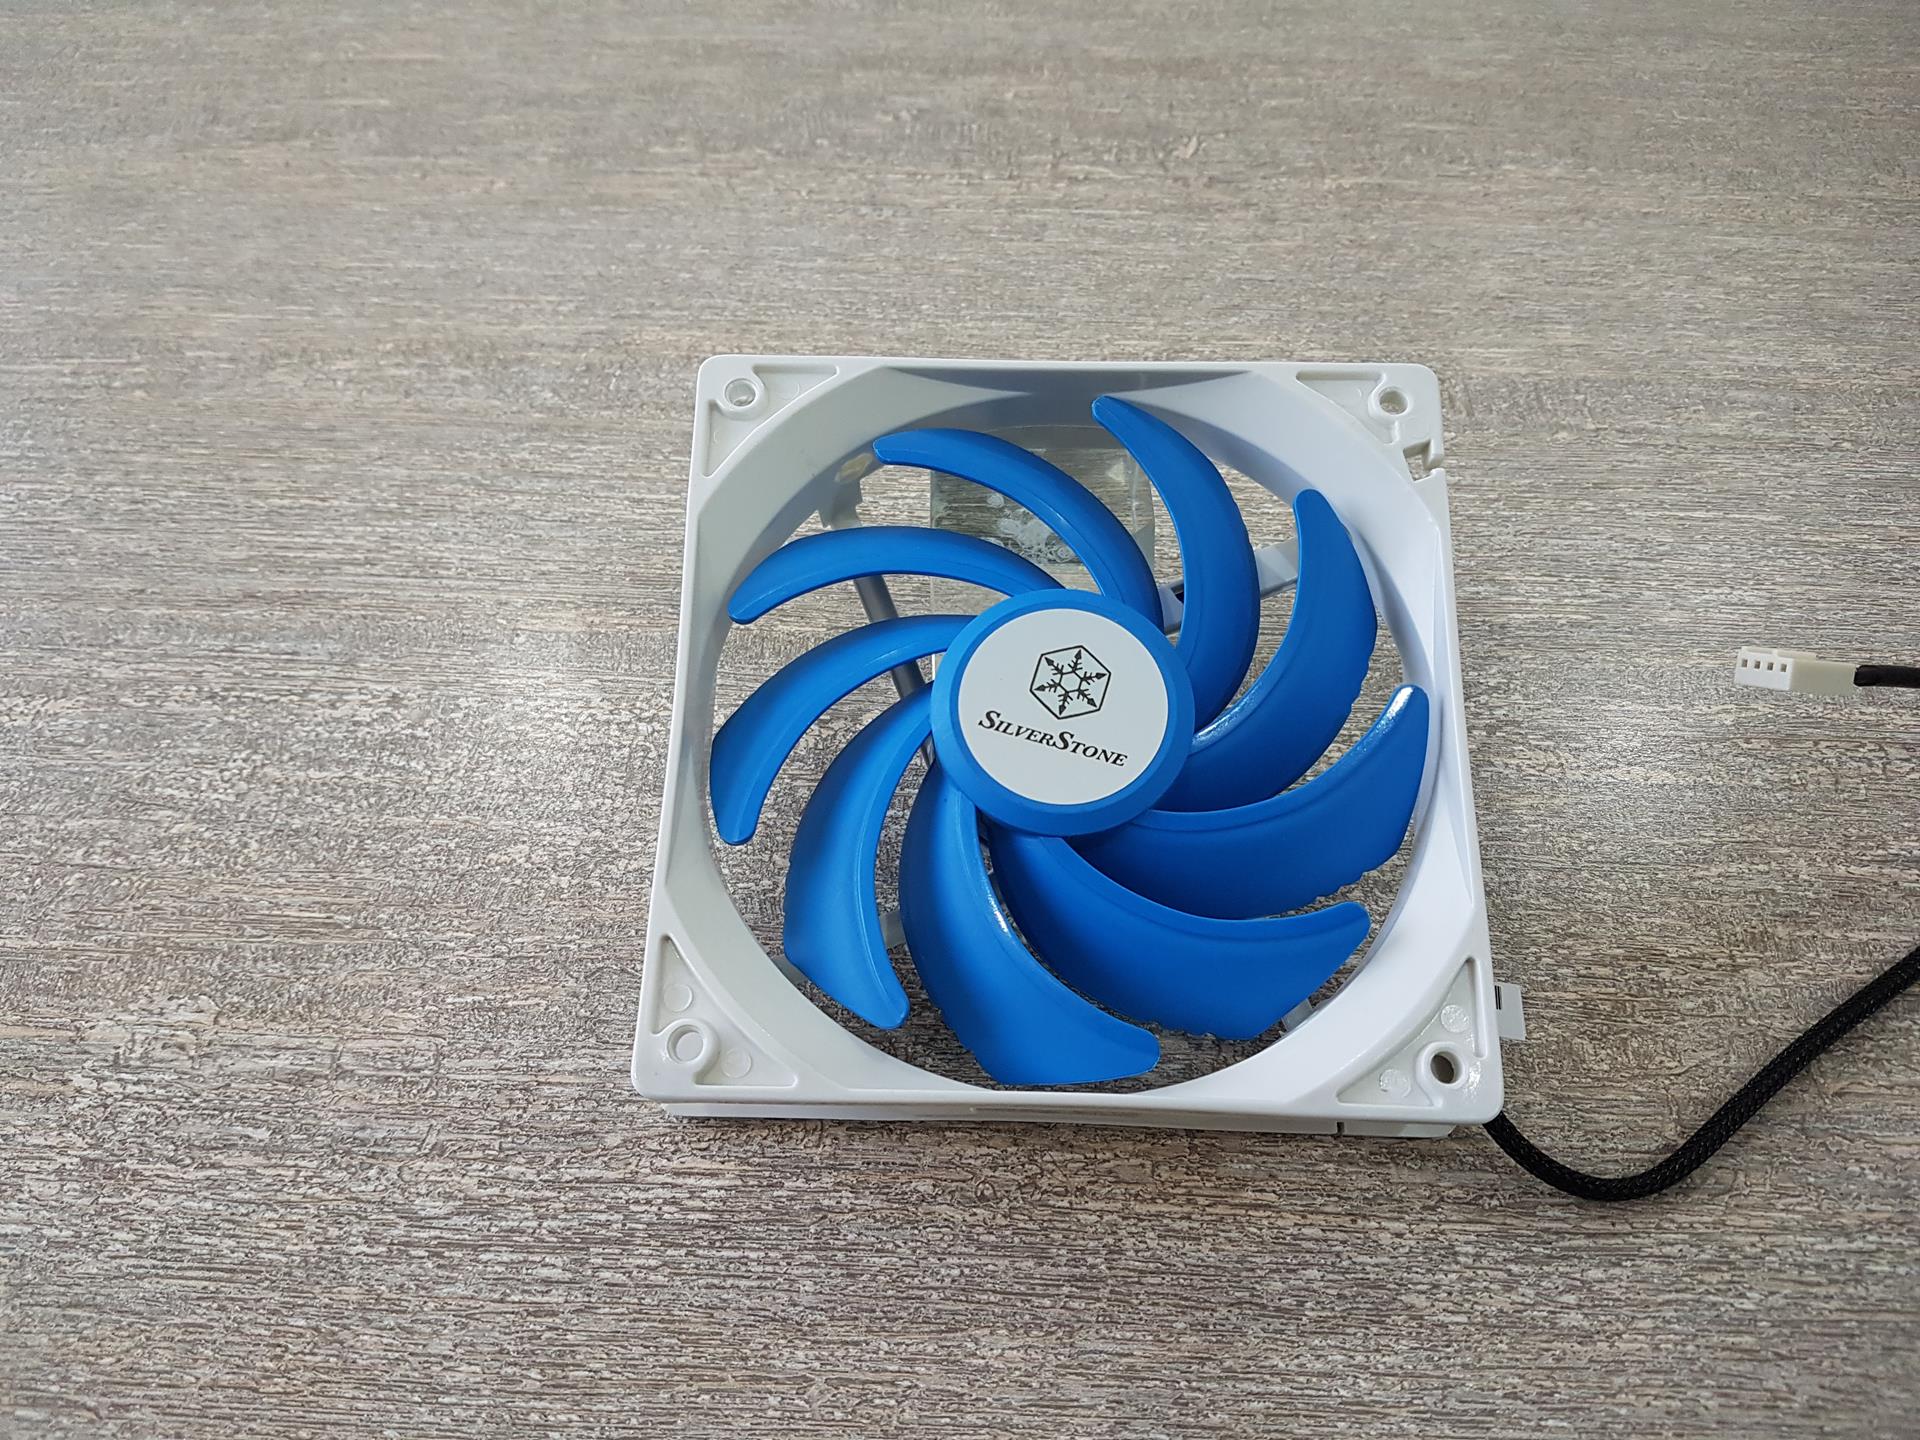 SilverStone SST-FQ121 Ultra-Quiet PWM 120mm Fans Review